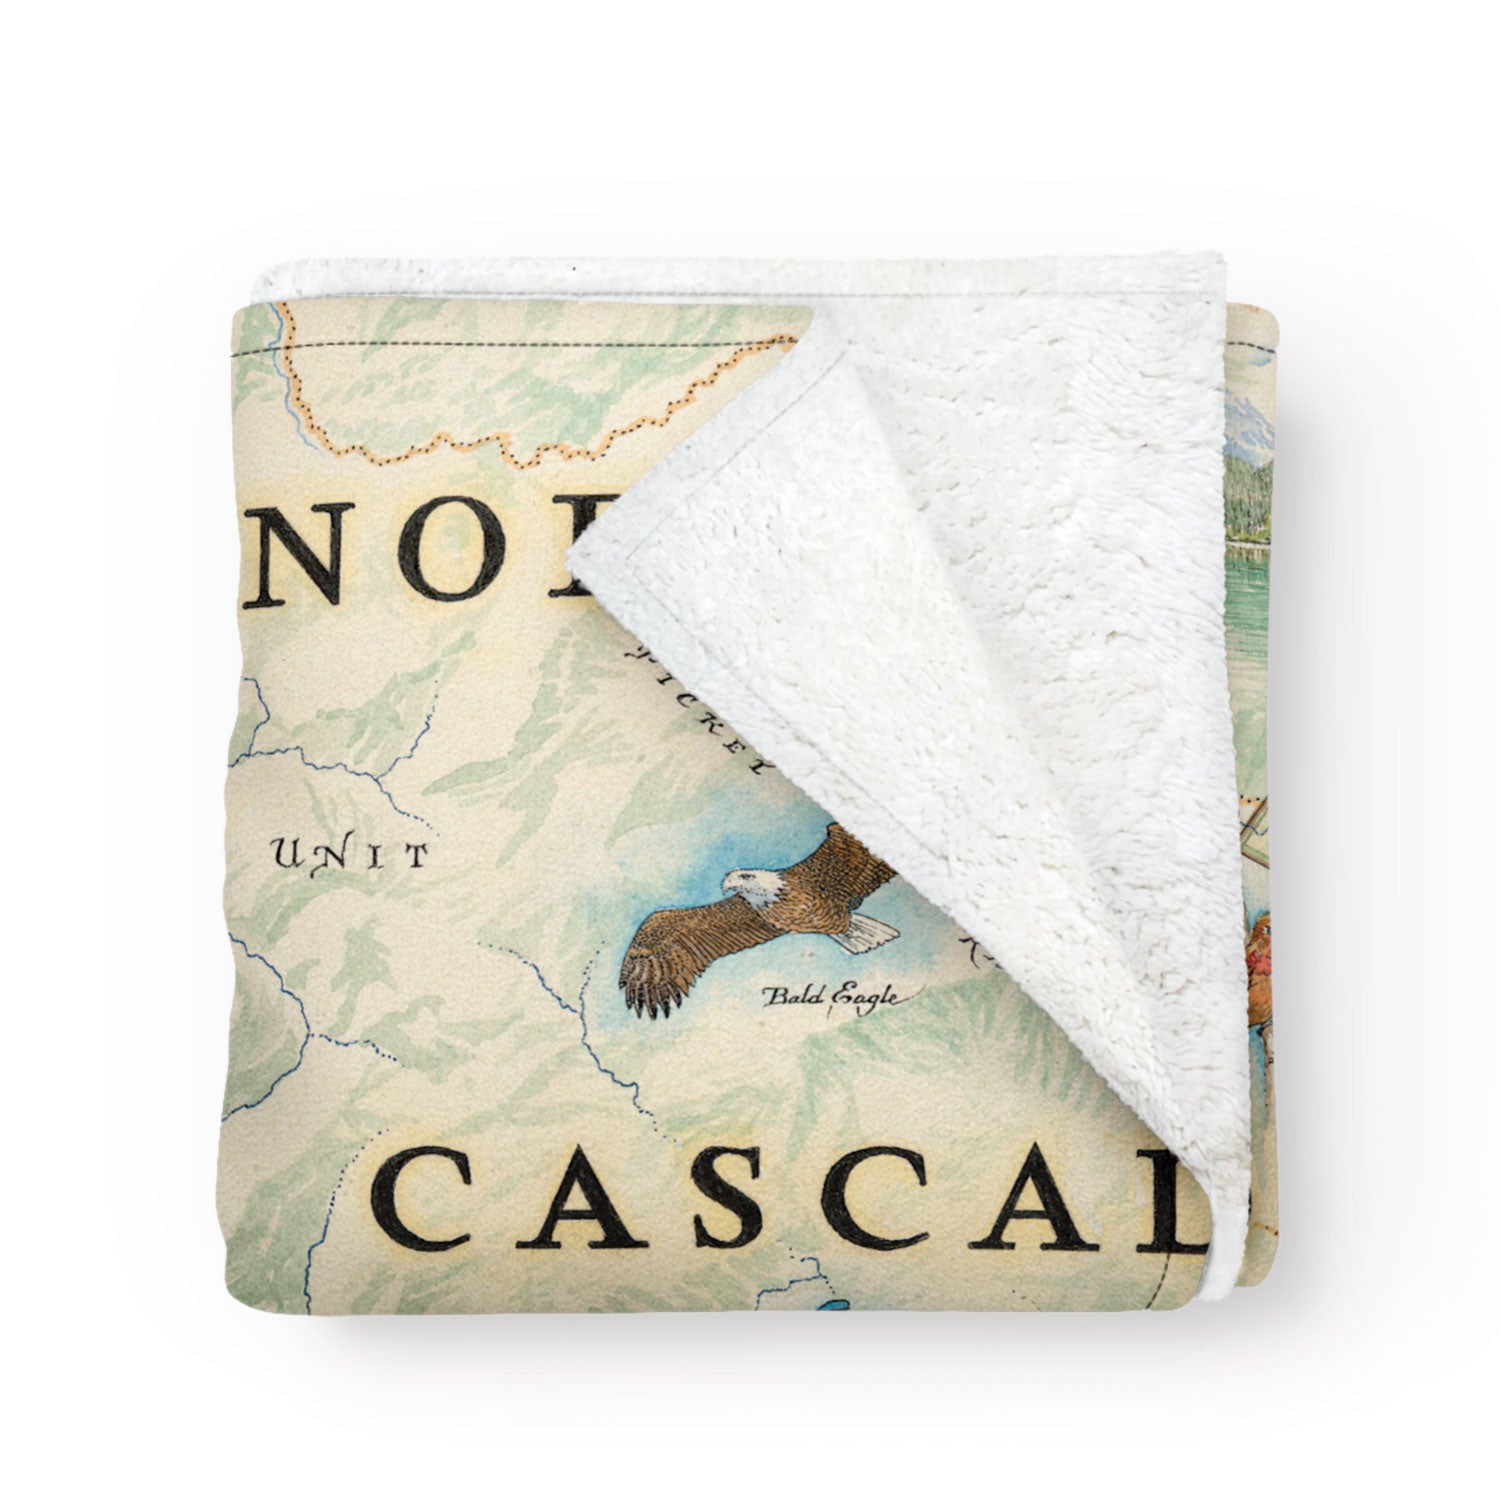 Folded blanket with map of North Cascades National Park. Soft and cozy art blanket. Measures 58